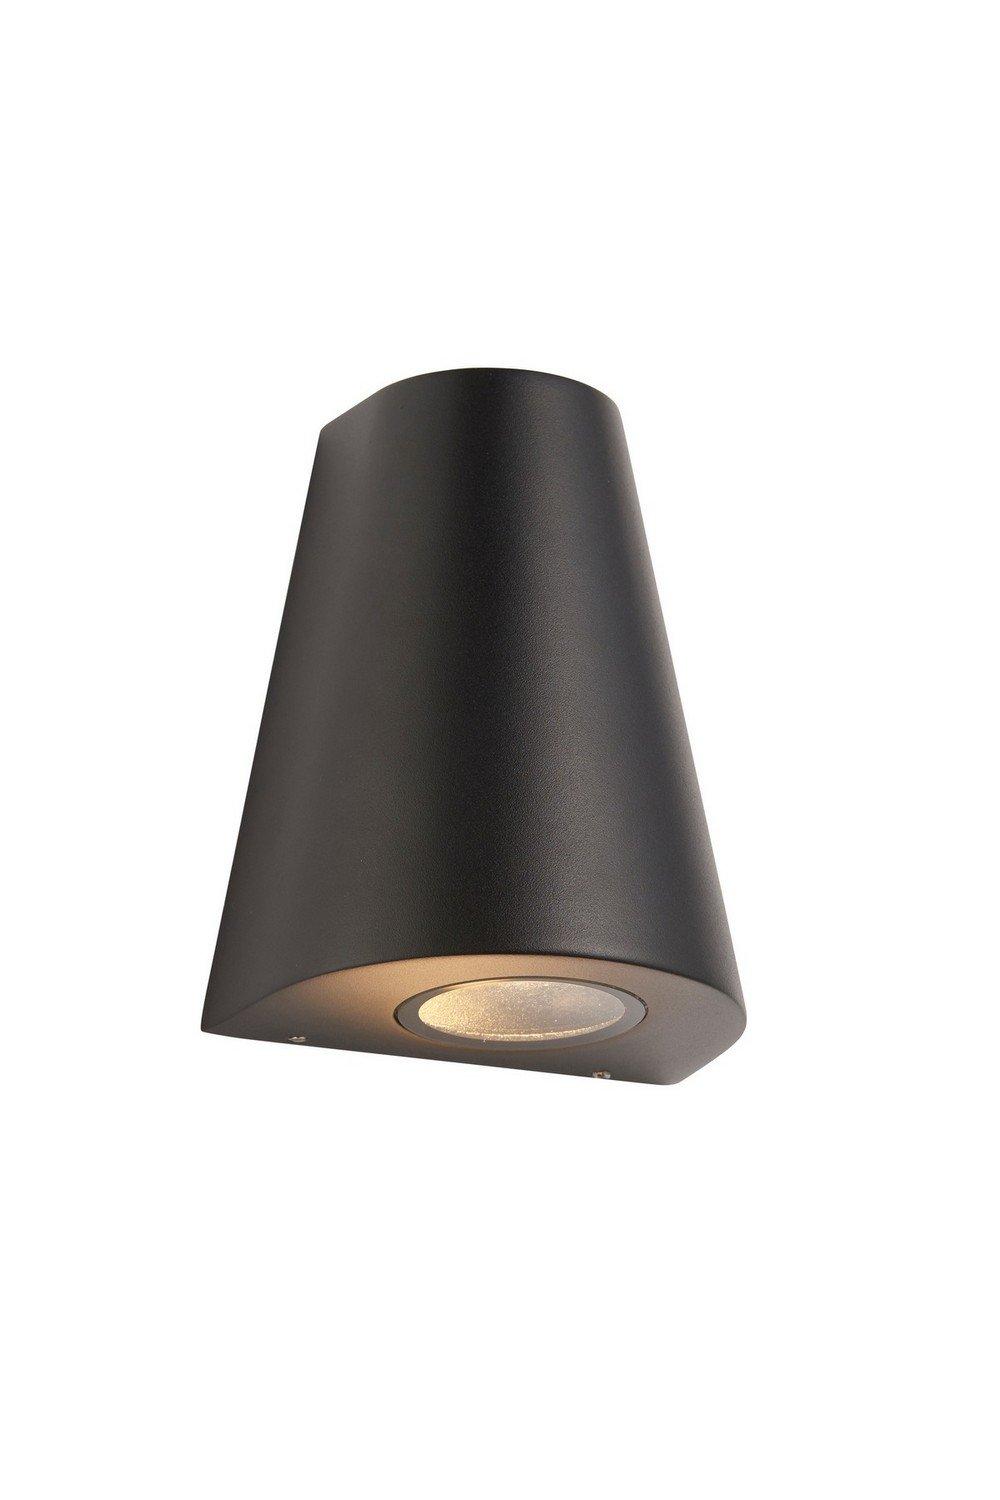 Helm Modern Outdoor Integrated LED Down Wall Light Textured Black Finish IP44